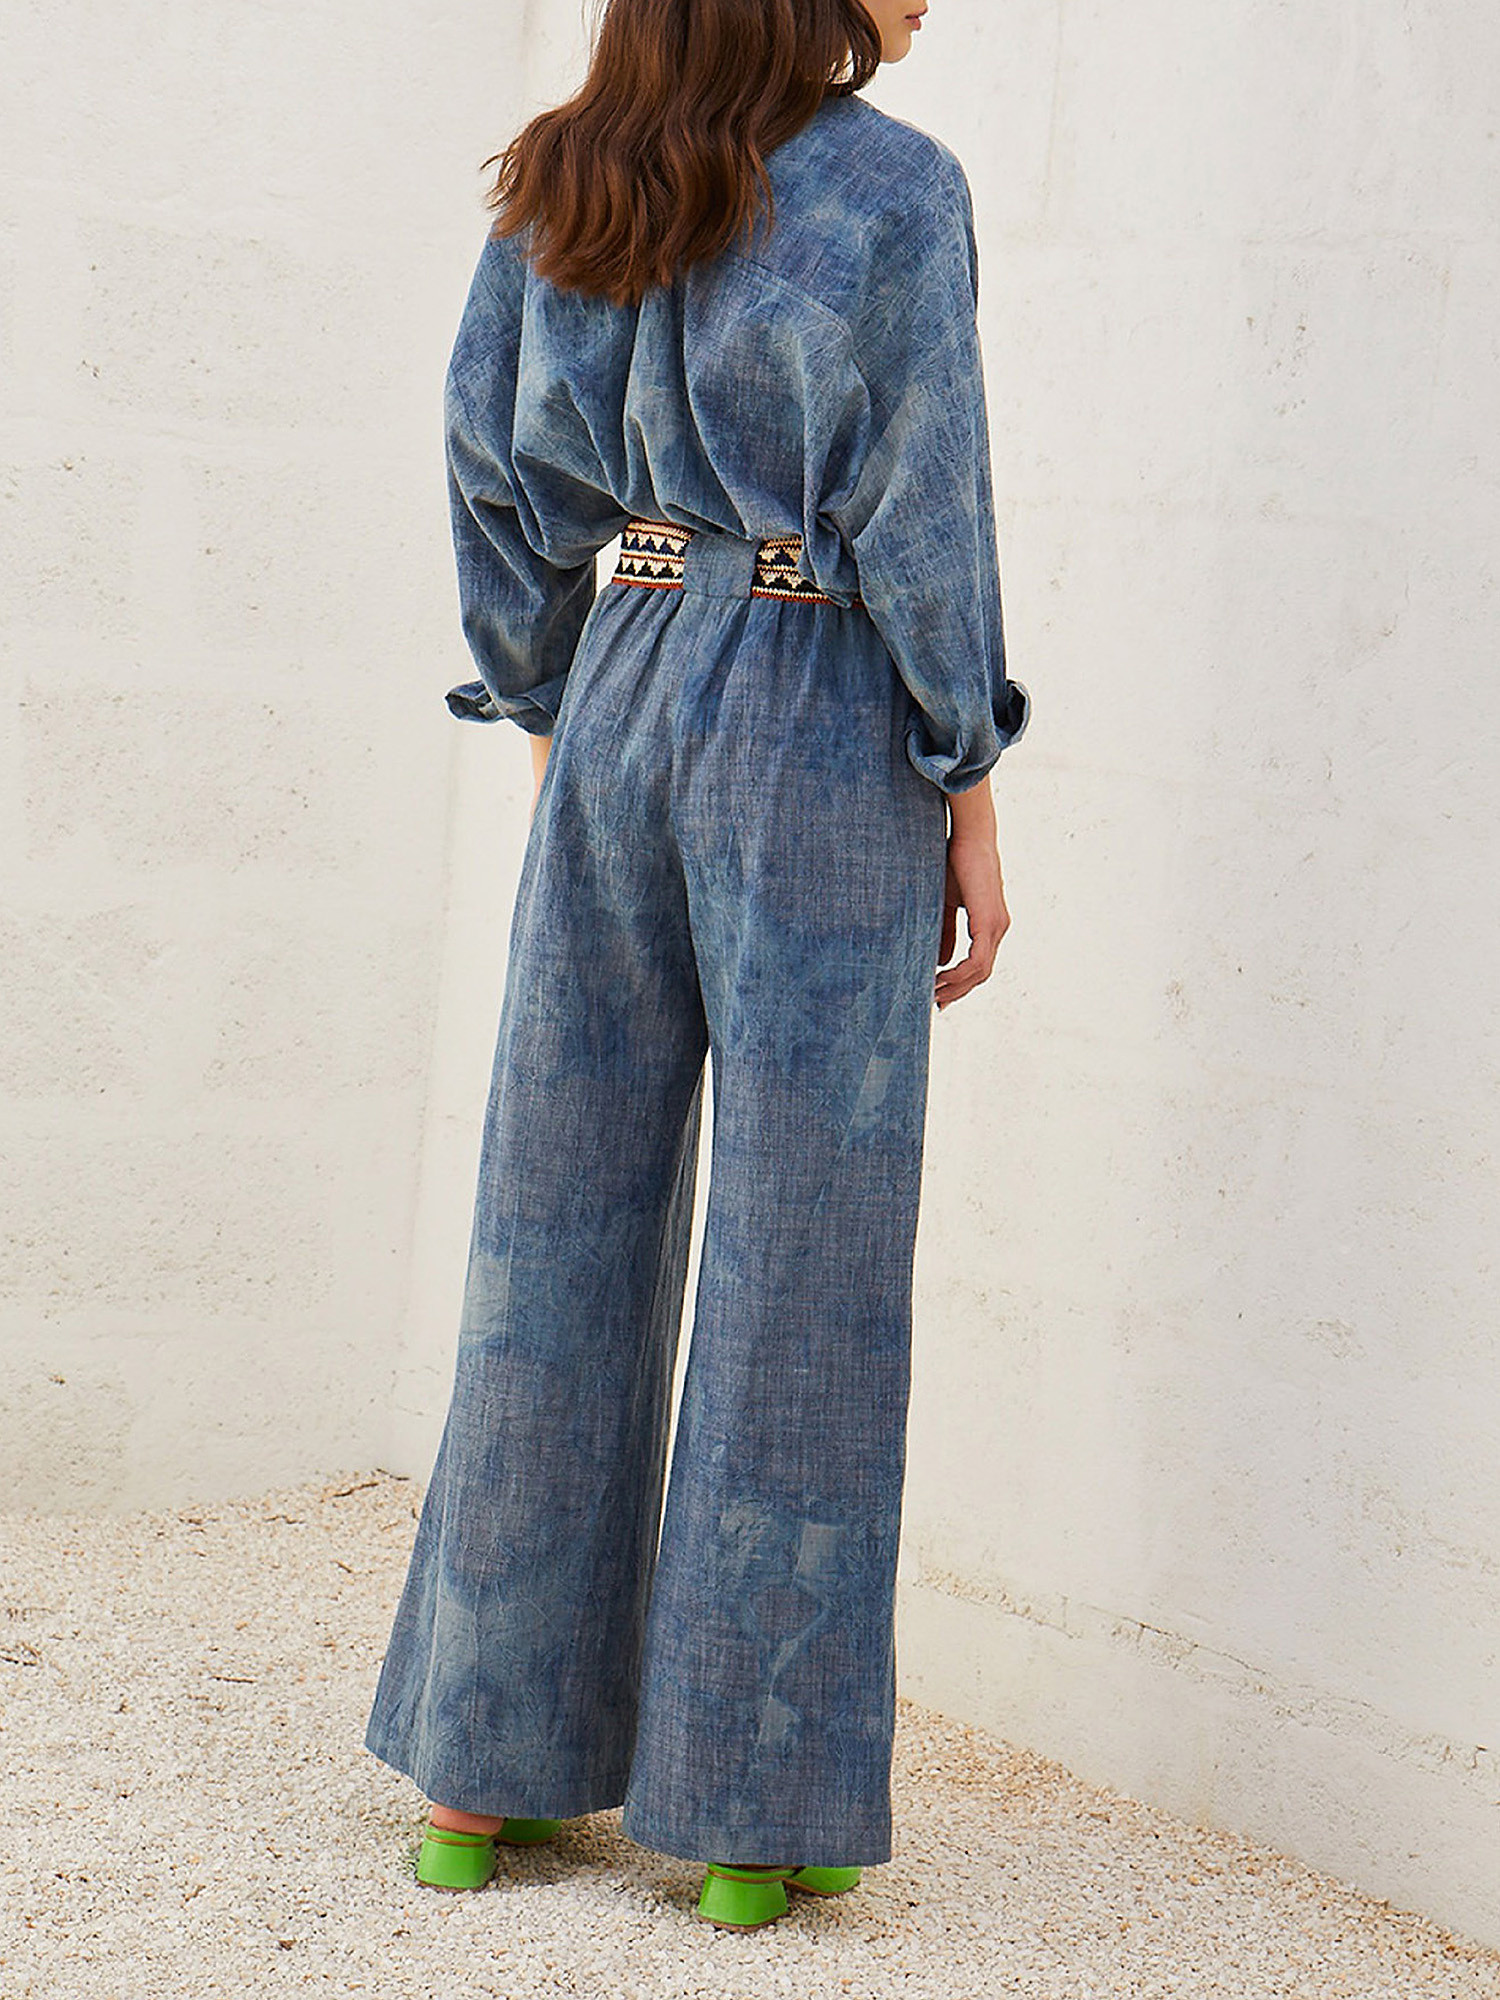 Momonì - Leona pants in tie dyed chambray, Denim, large image number 2